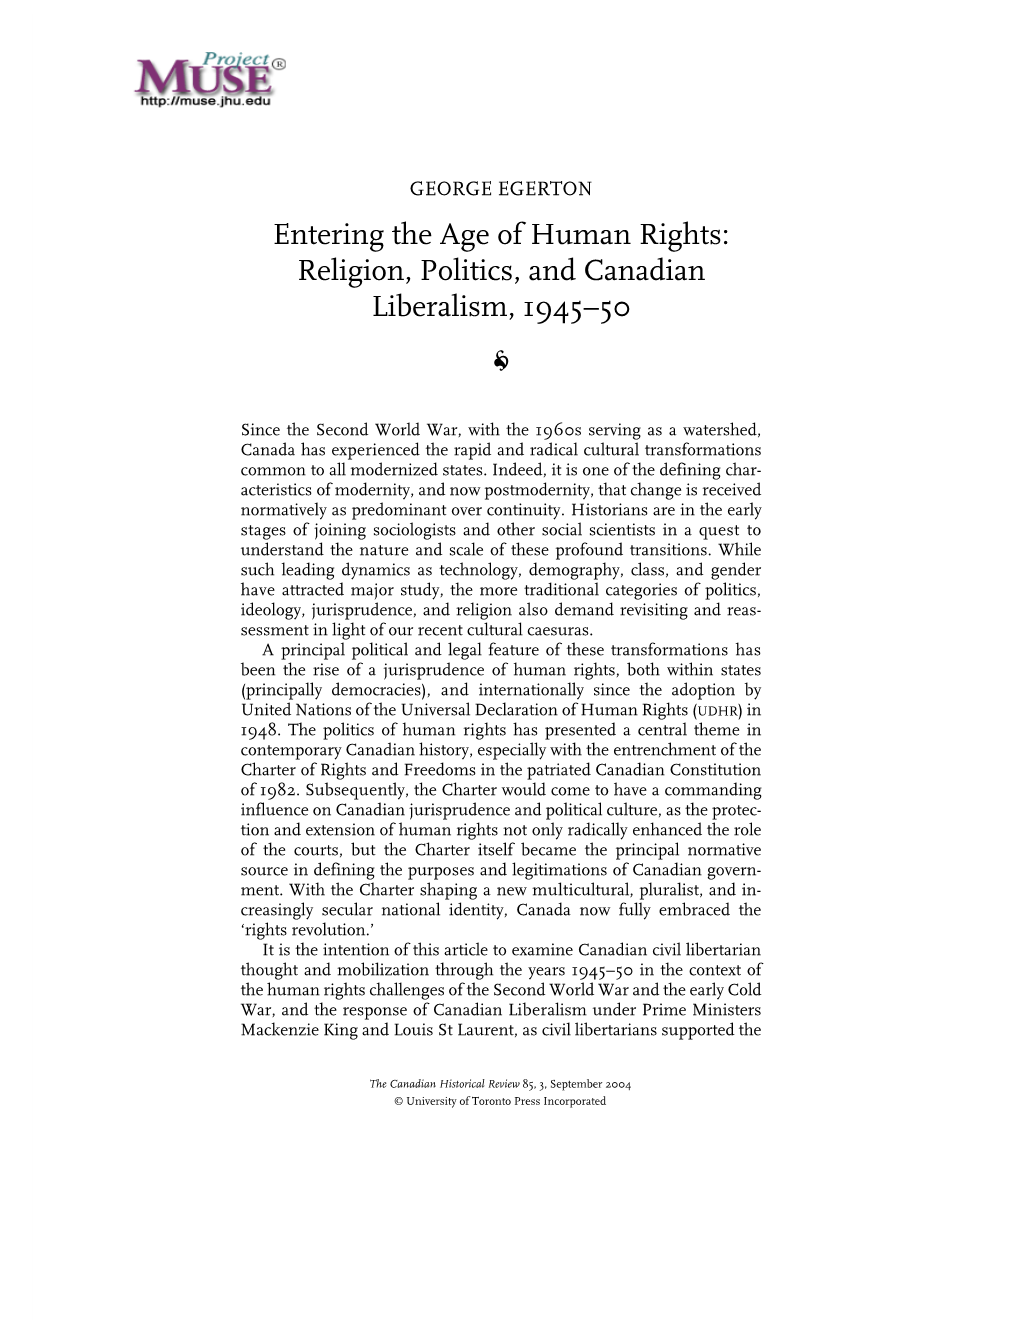 Entering the Age of Human Rights: Religion, Politics, and Canadian Liberalism, 1945–50 